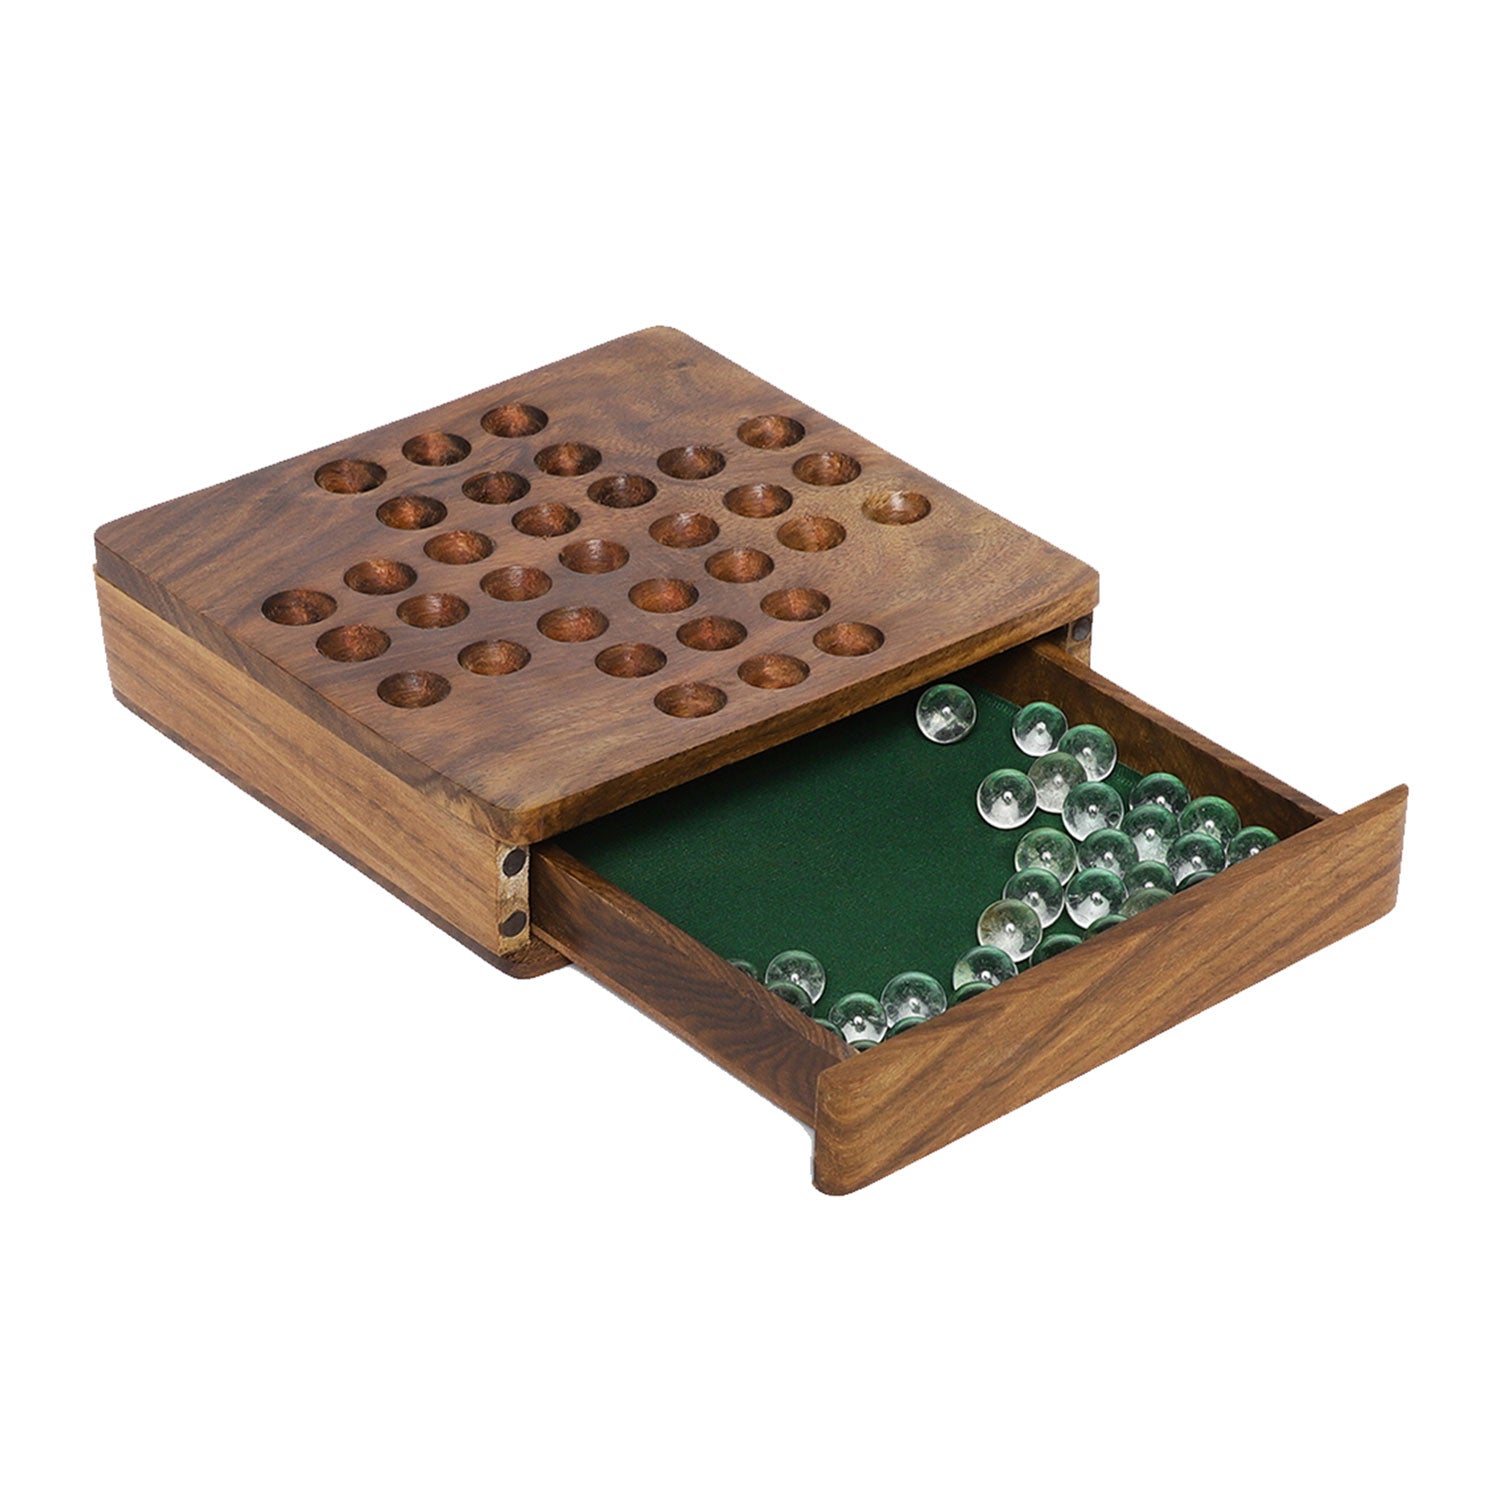 Wood-game, Solitaire, [79/3912] - Out of the blue KG - Online-Shop